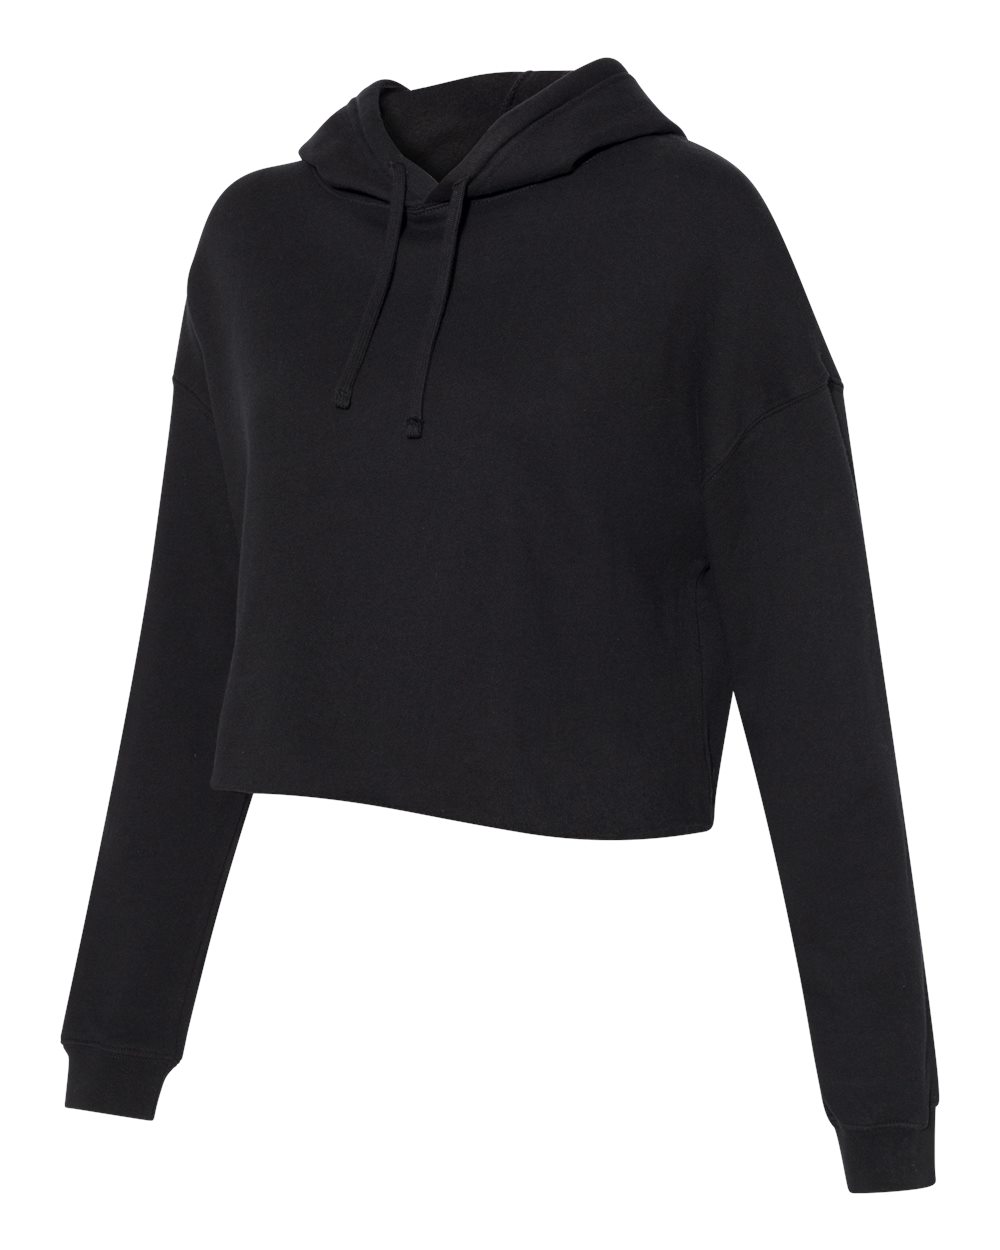 Independent Trading Co. AFX64CRP | Women’s Lightweight Cropped Hooded ...